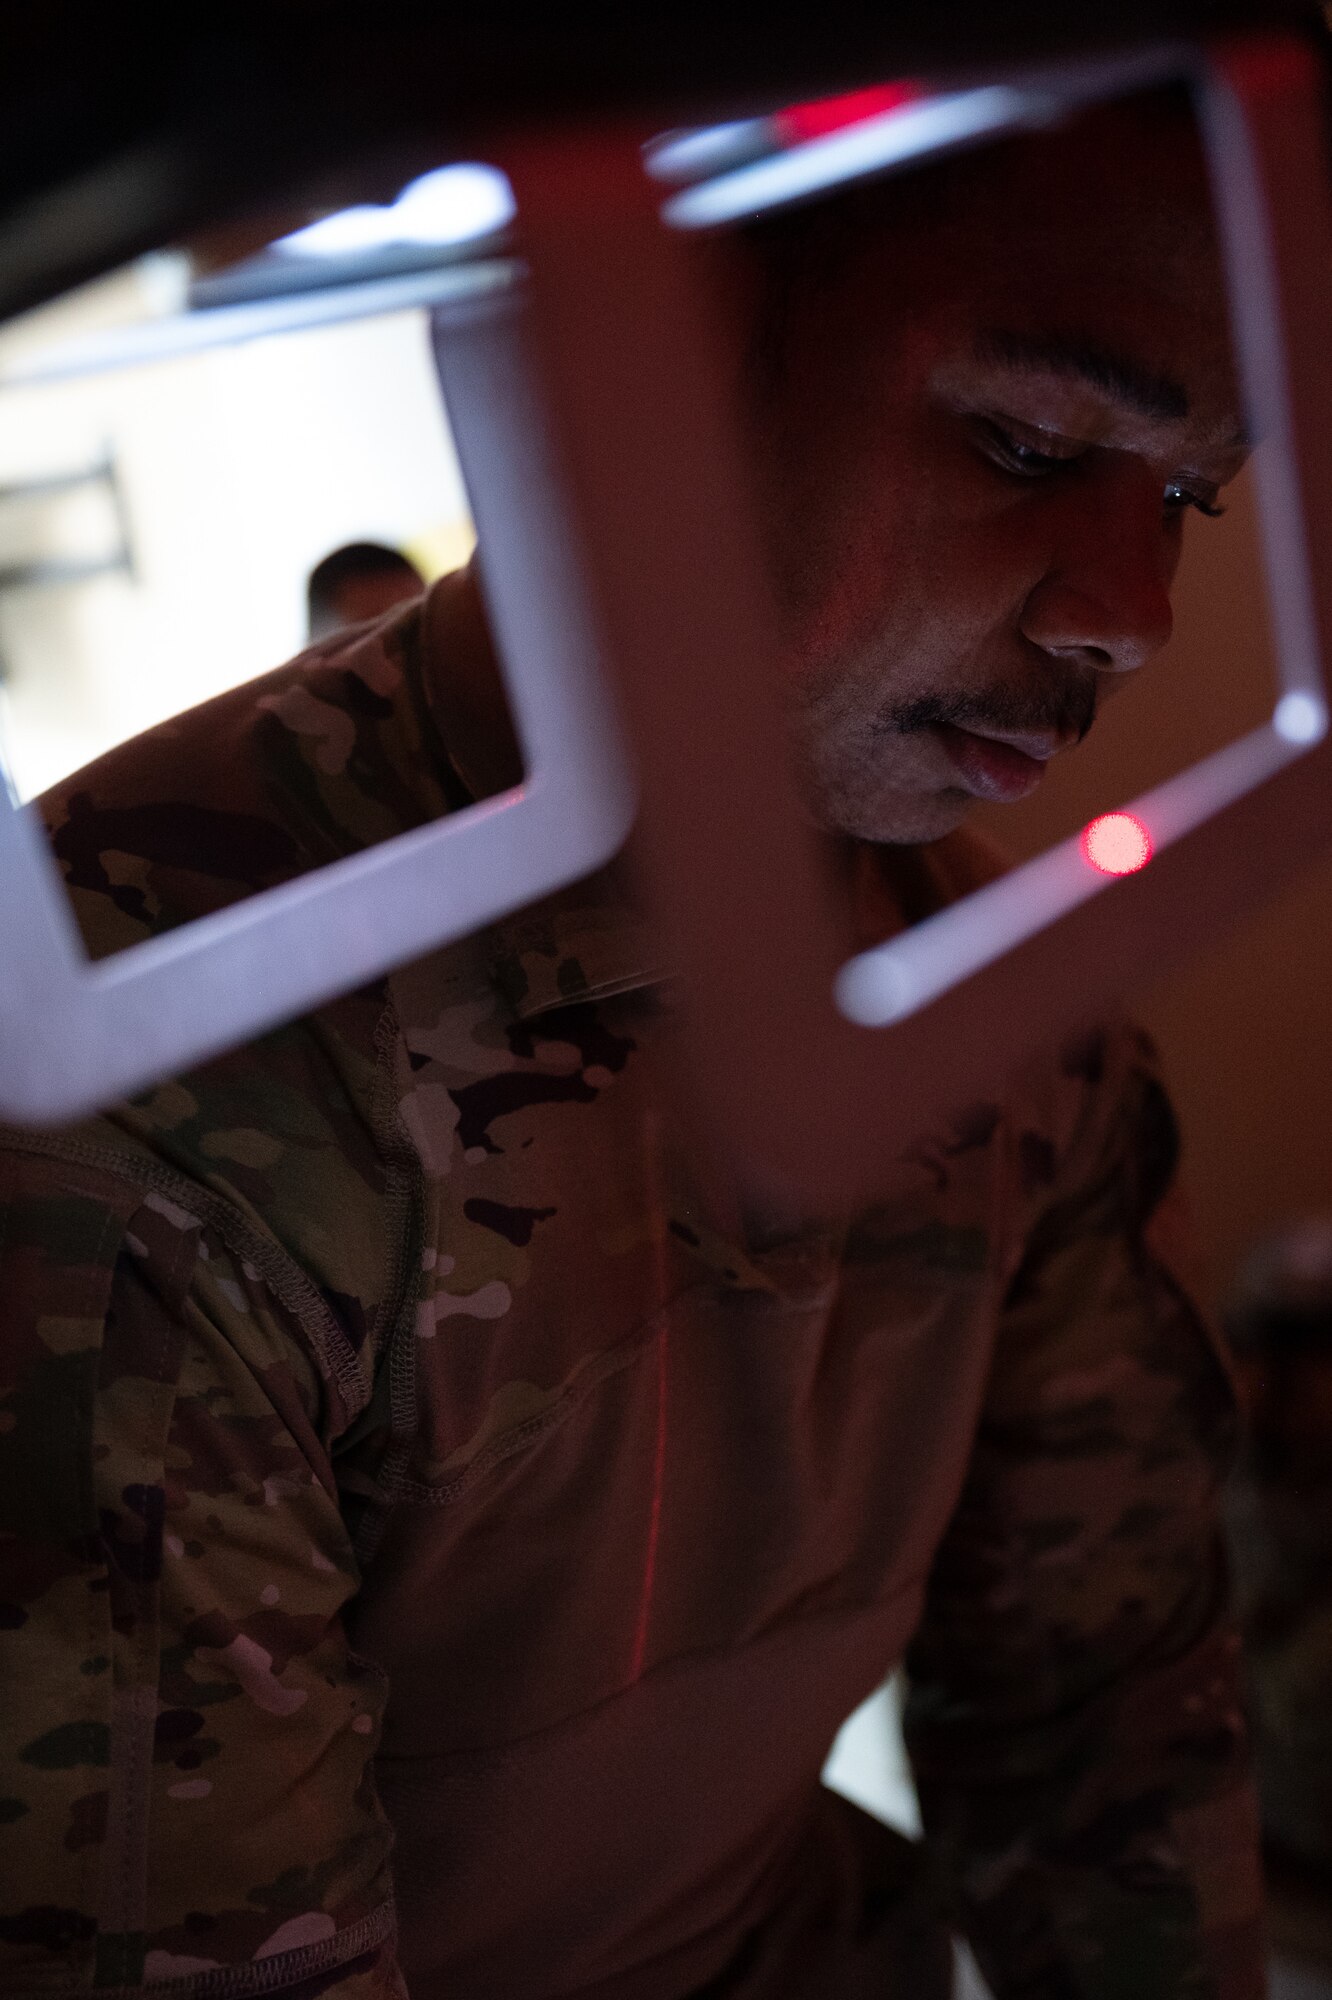 U.S. Air Force Senior Airman Tommy D. Jones, 332d Expeditionary Medical Group laboratory technician, prepares the x-ray room for a patient at an undisclosed location in Southwest Asia, April 9, 2022. Jones is the 332d EMDG’s only laboratory technician and is one of many multi-capable Airmen within the 332d EMDG supporting daily operations. (U.S. Air Force photo by Master Sgt. Christopher Parr)